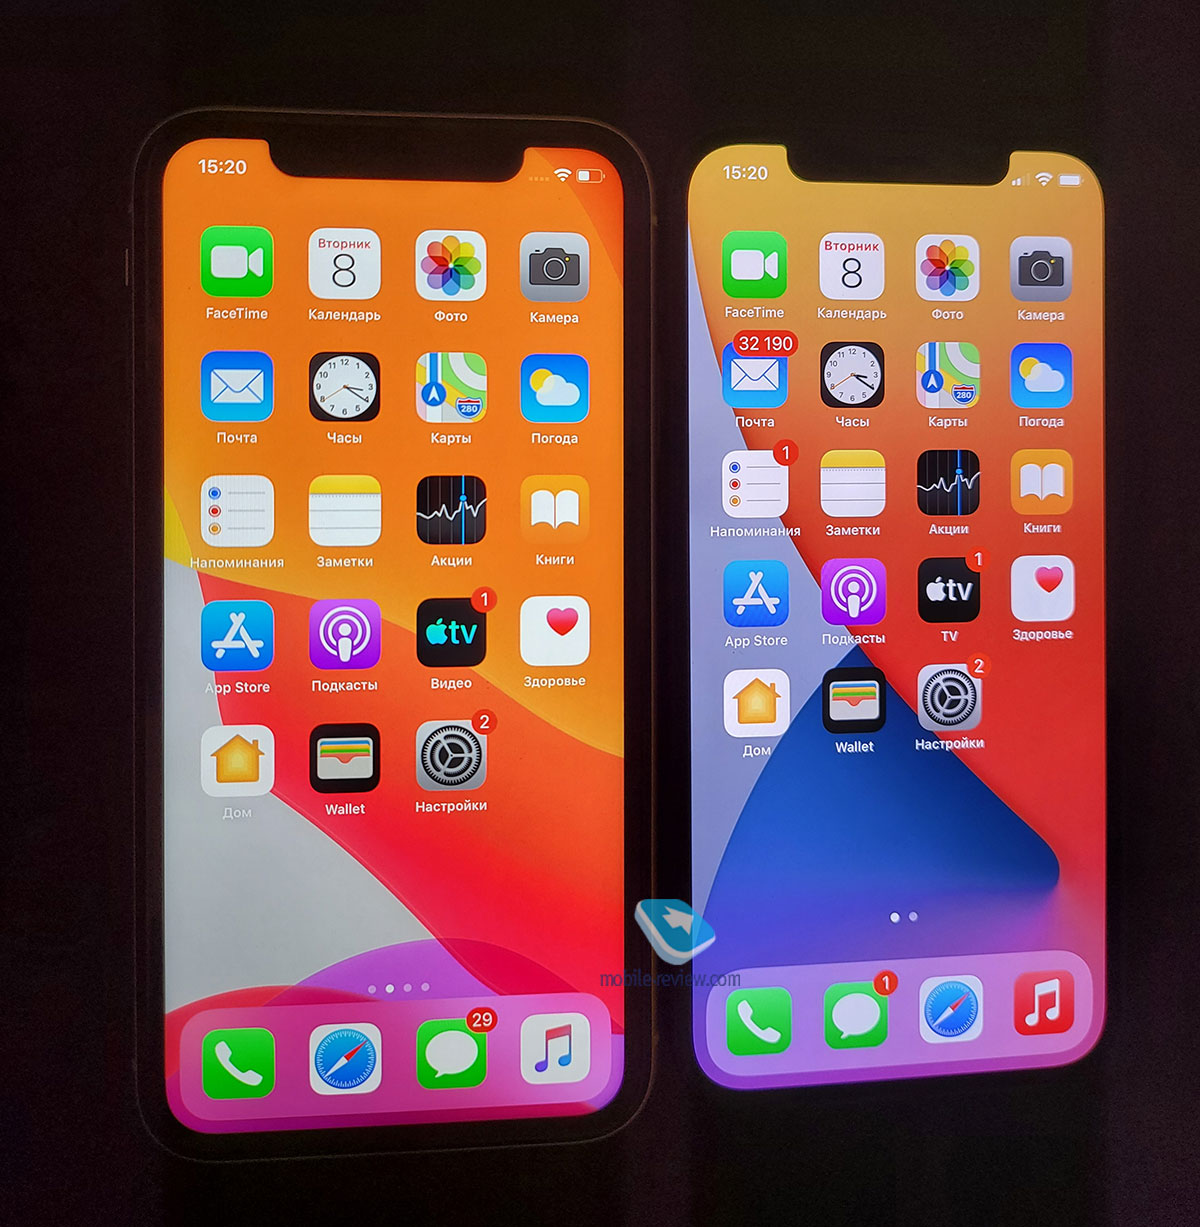 Buyer's guide. iPhone 11 vs iPhone 12, why the old iPhone is better